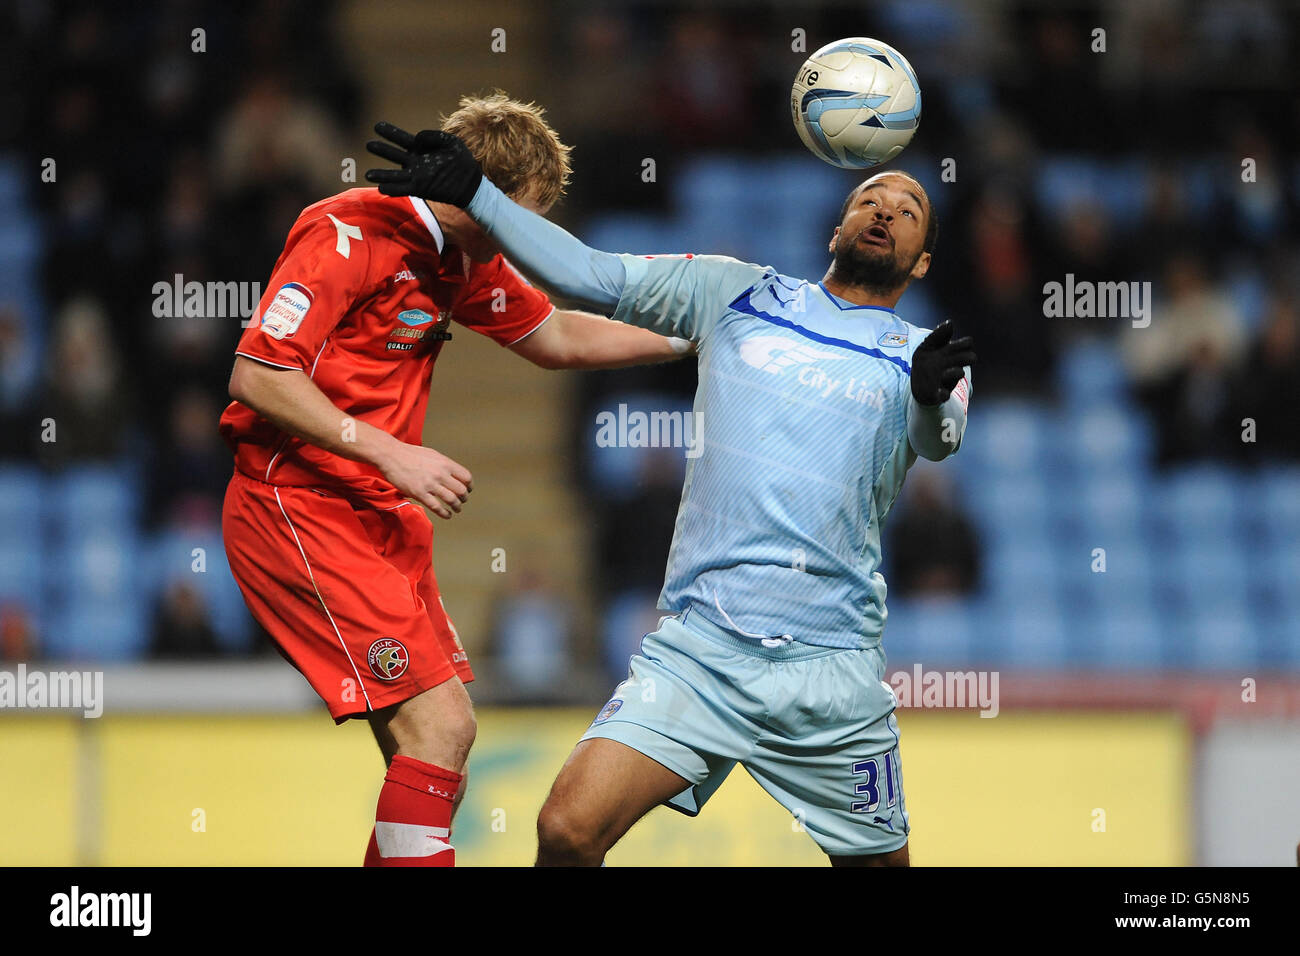 Coventry City's David McGoldrick and Walsall's Dean Holden battle for the ball during the npower Football League One match at the Ricoh Arena, Coventry. Stock Photo